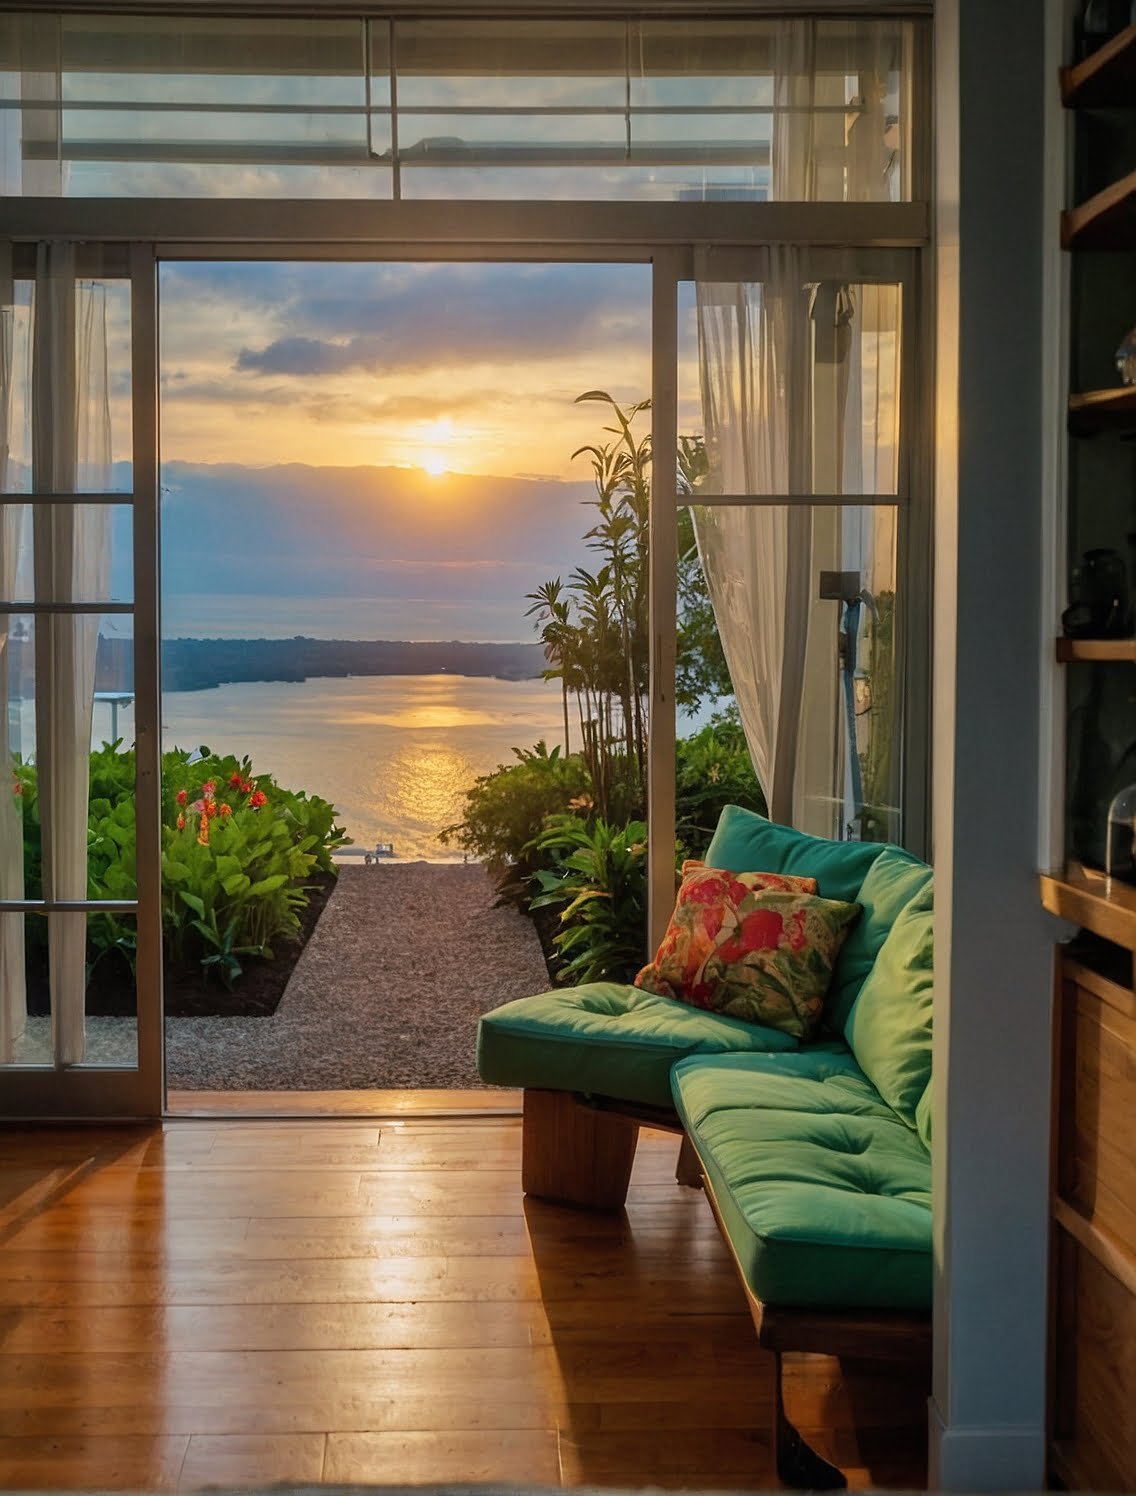 Lakeside Serenity: Sunset Views and Cozy Interiors